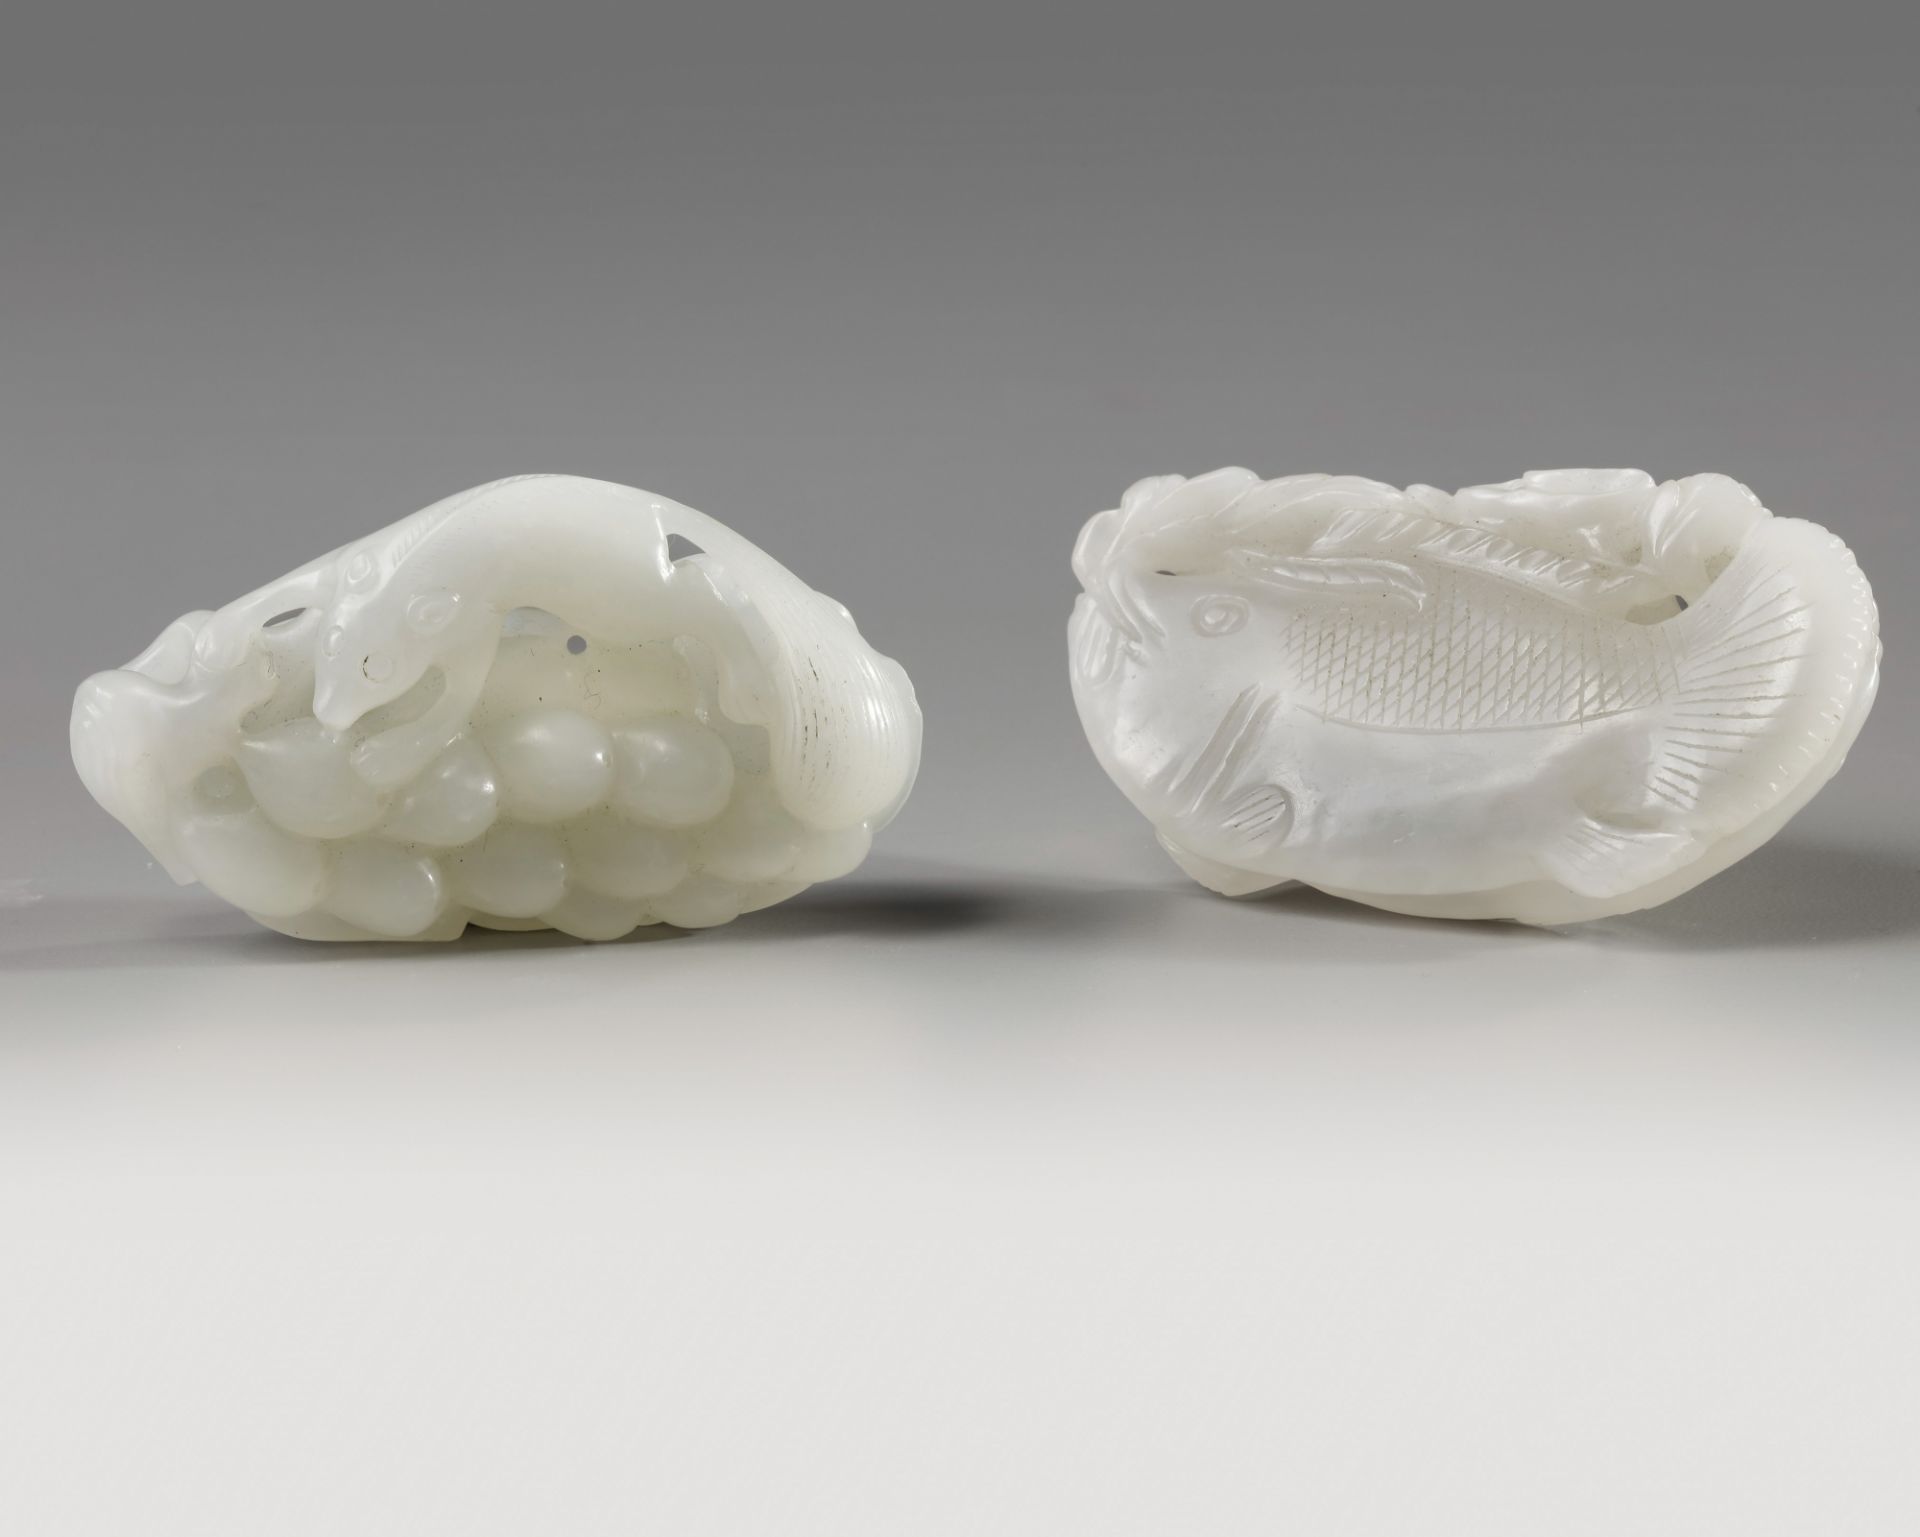 A Chinese white jade ‘squirrel and grapes’ carving and a white jade ‘twin fish’ carving